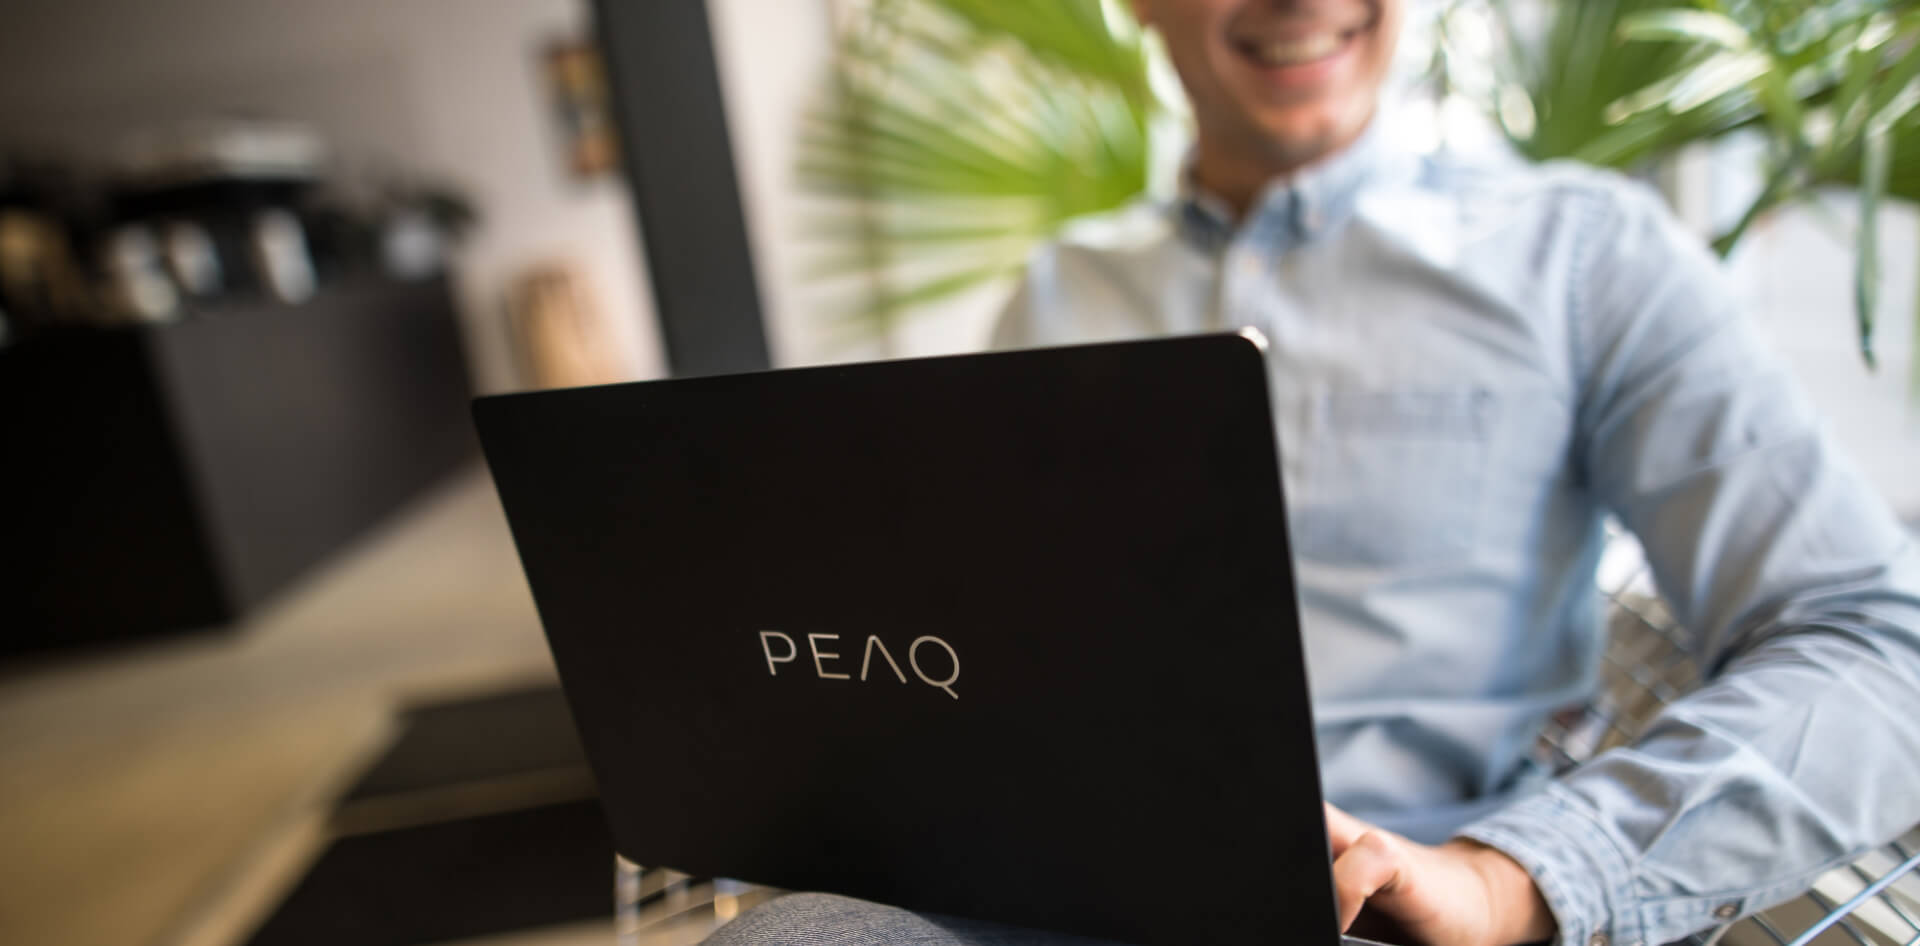 A young man with a PEAQ laptop on his lap, smiling, sitting in an office or café, close-up